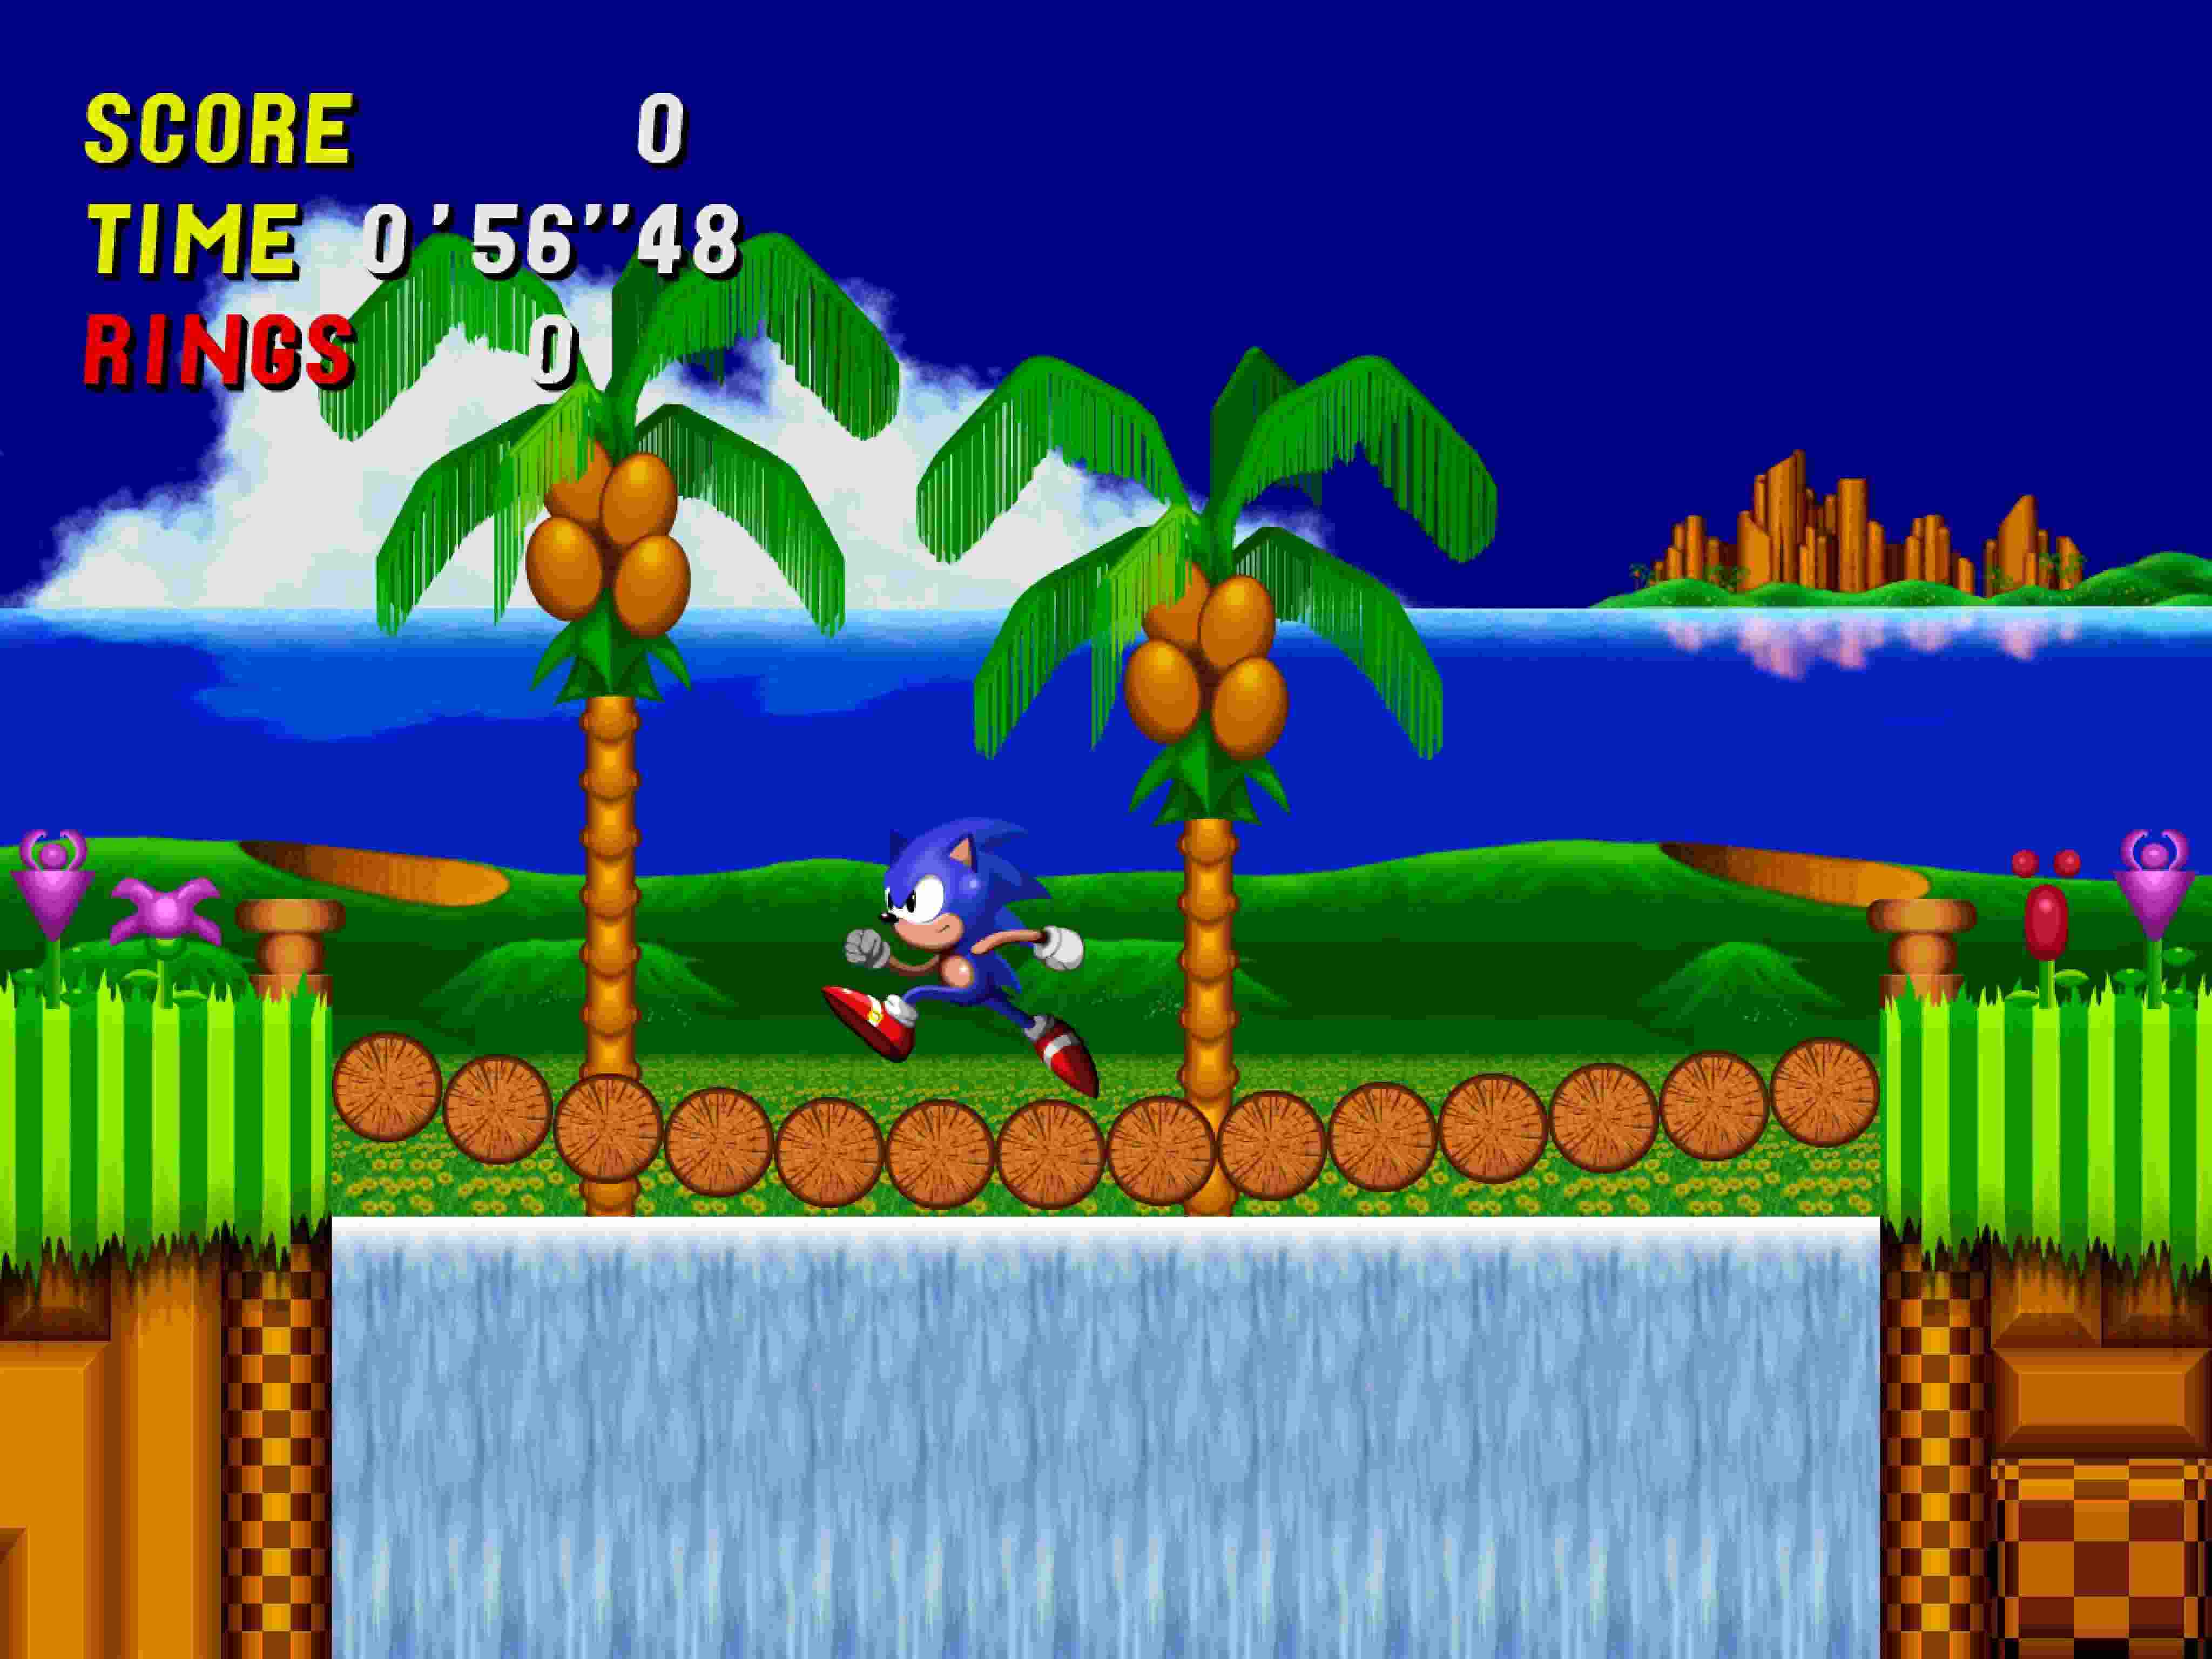 sonic the hedgehog 2, video game, sonic the hedgehog, sonic